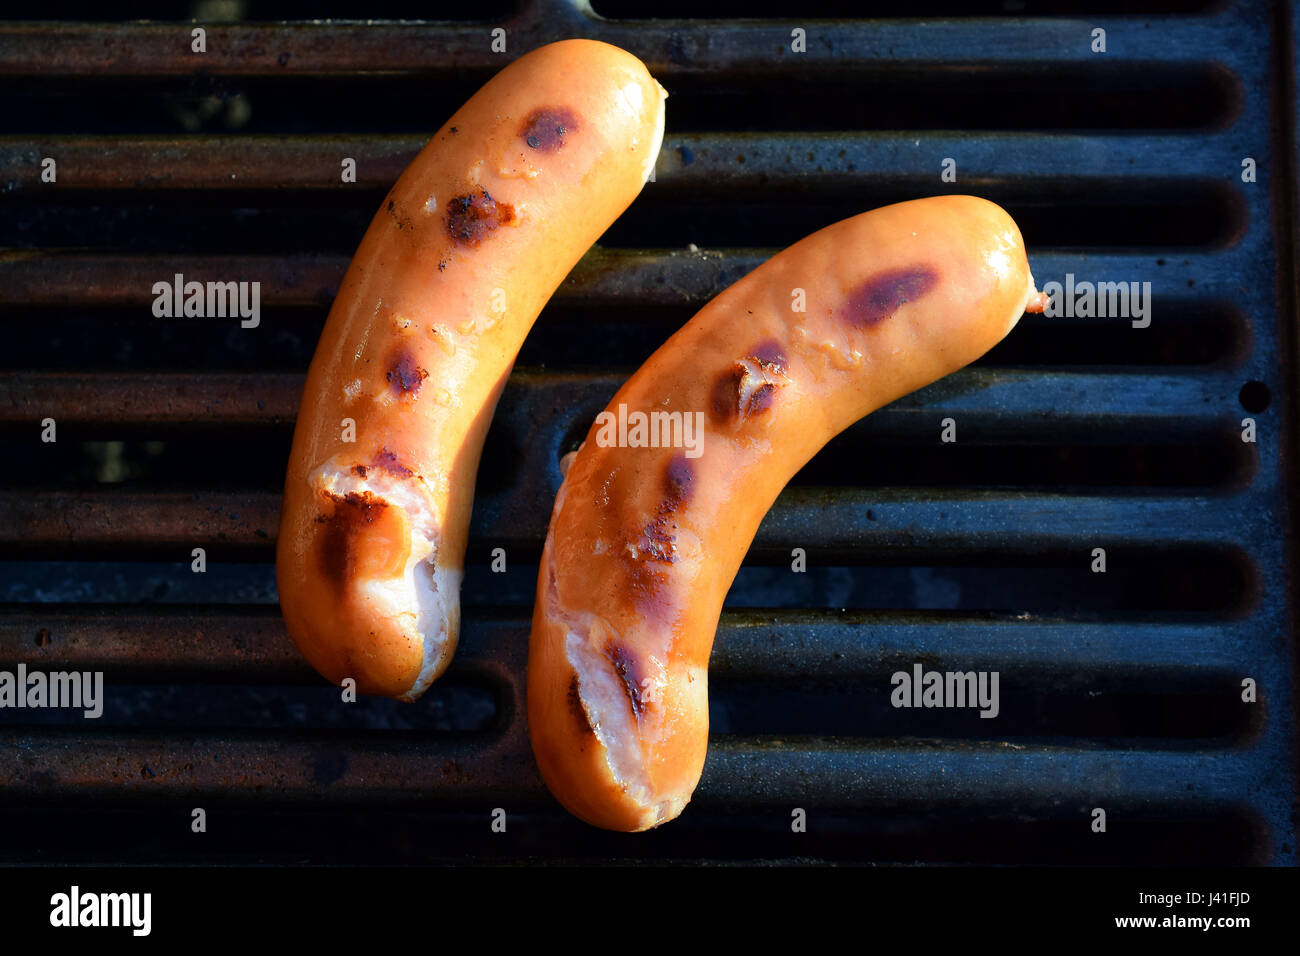 High angle view of two sausages on barbeque grill Stock Photo